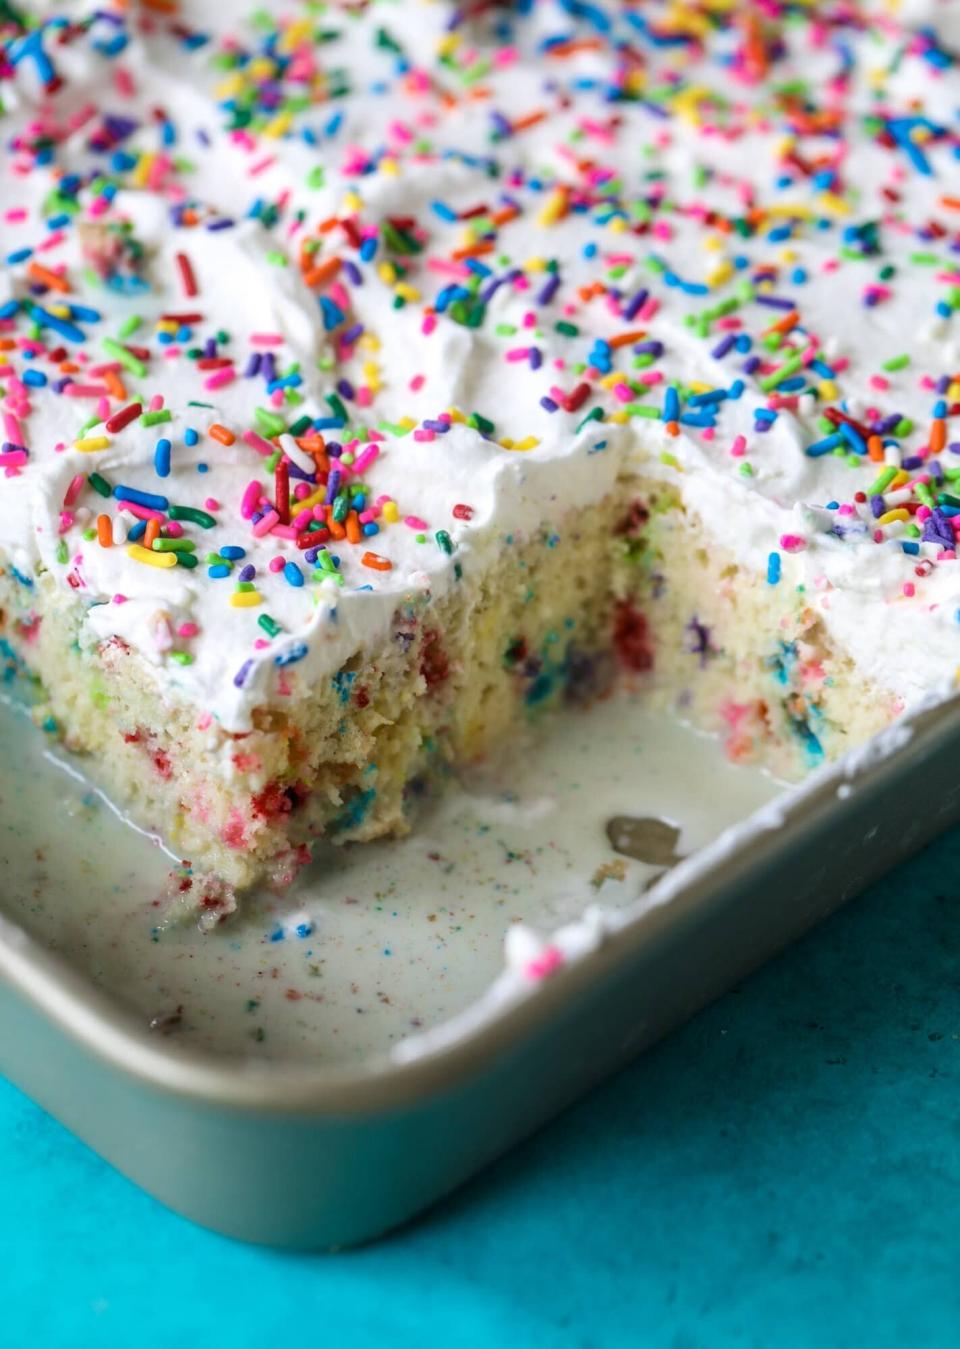 <strong><a href="https://www.howsweeteats.com/2019/05/tres-leches-confetti-cake/" target="_blank" rel="noopener noreferrer">Get the Tres Leches Confetti Cake recipe from How Sweet Eats</a></strong>